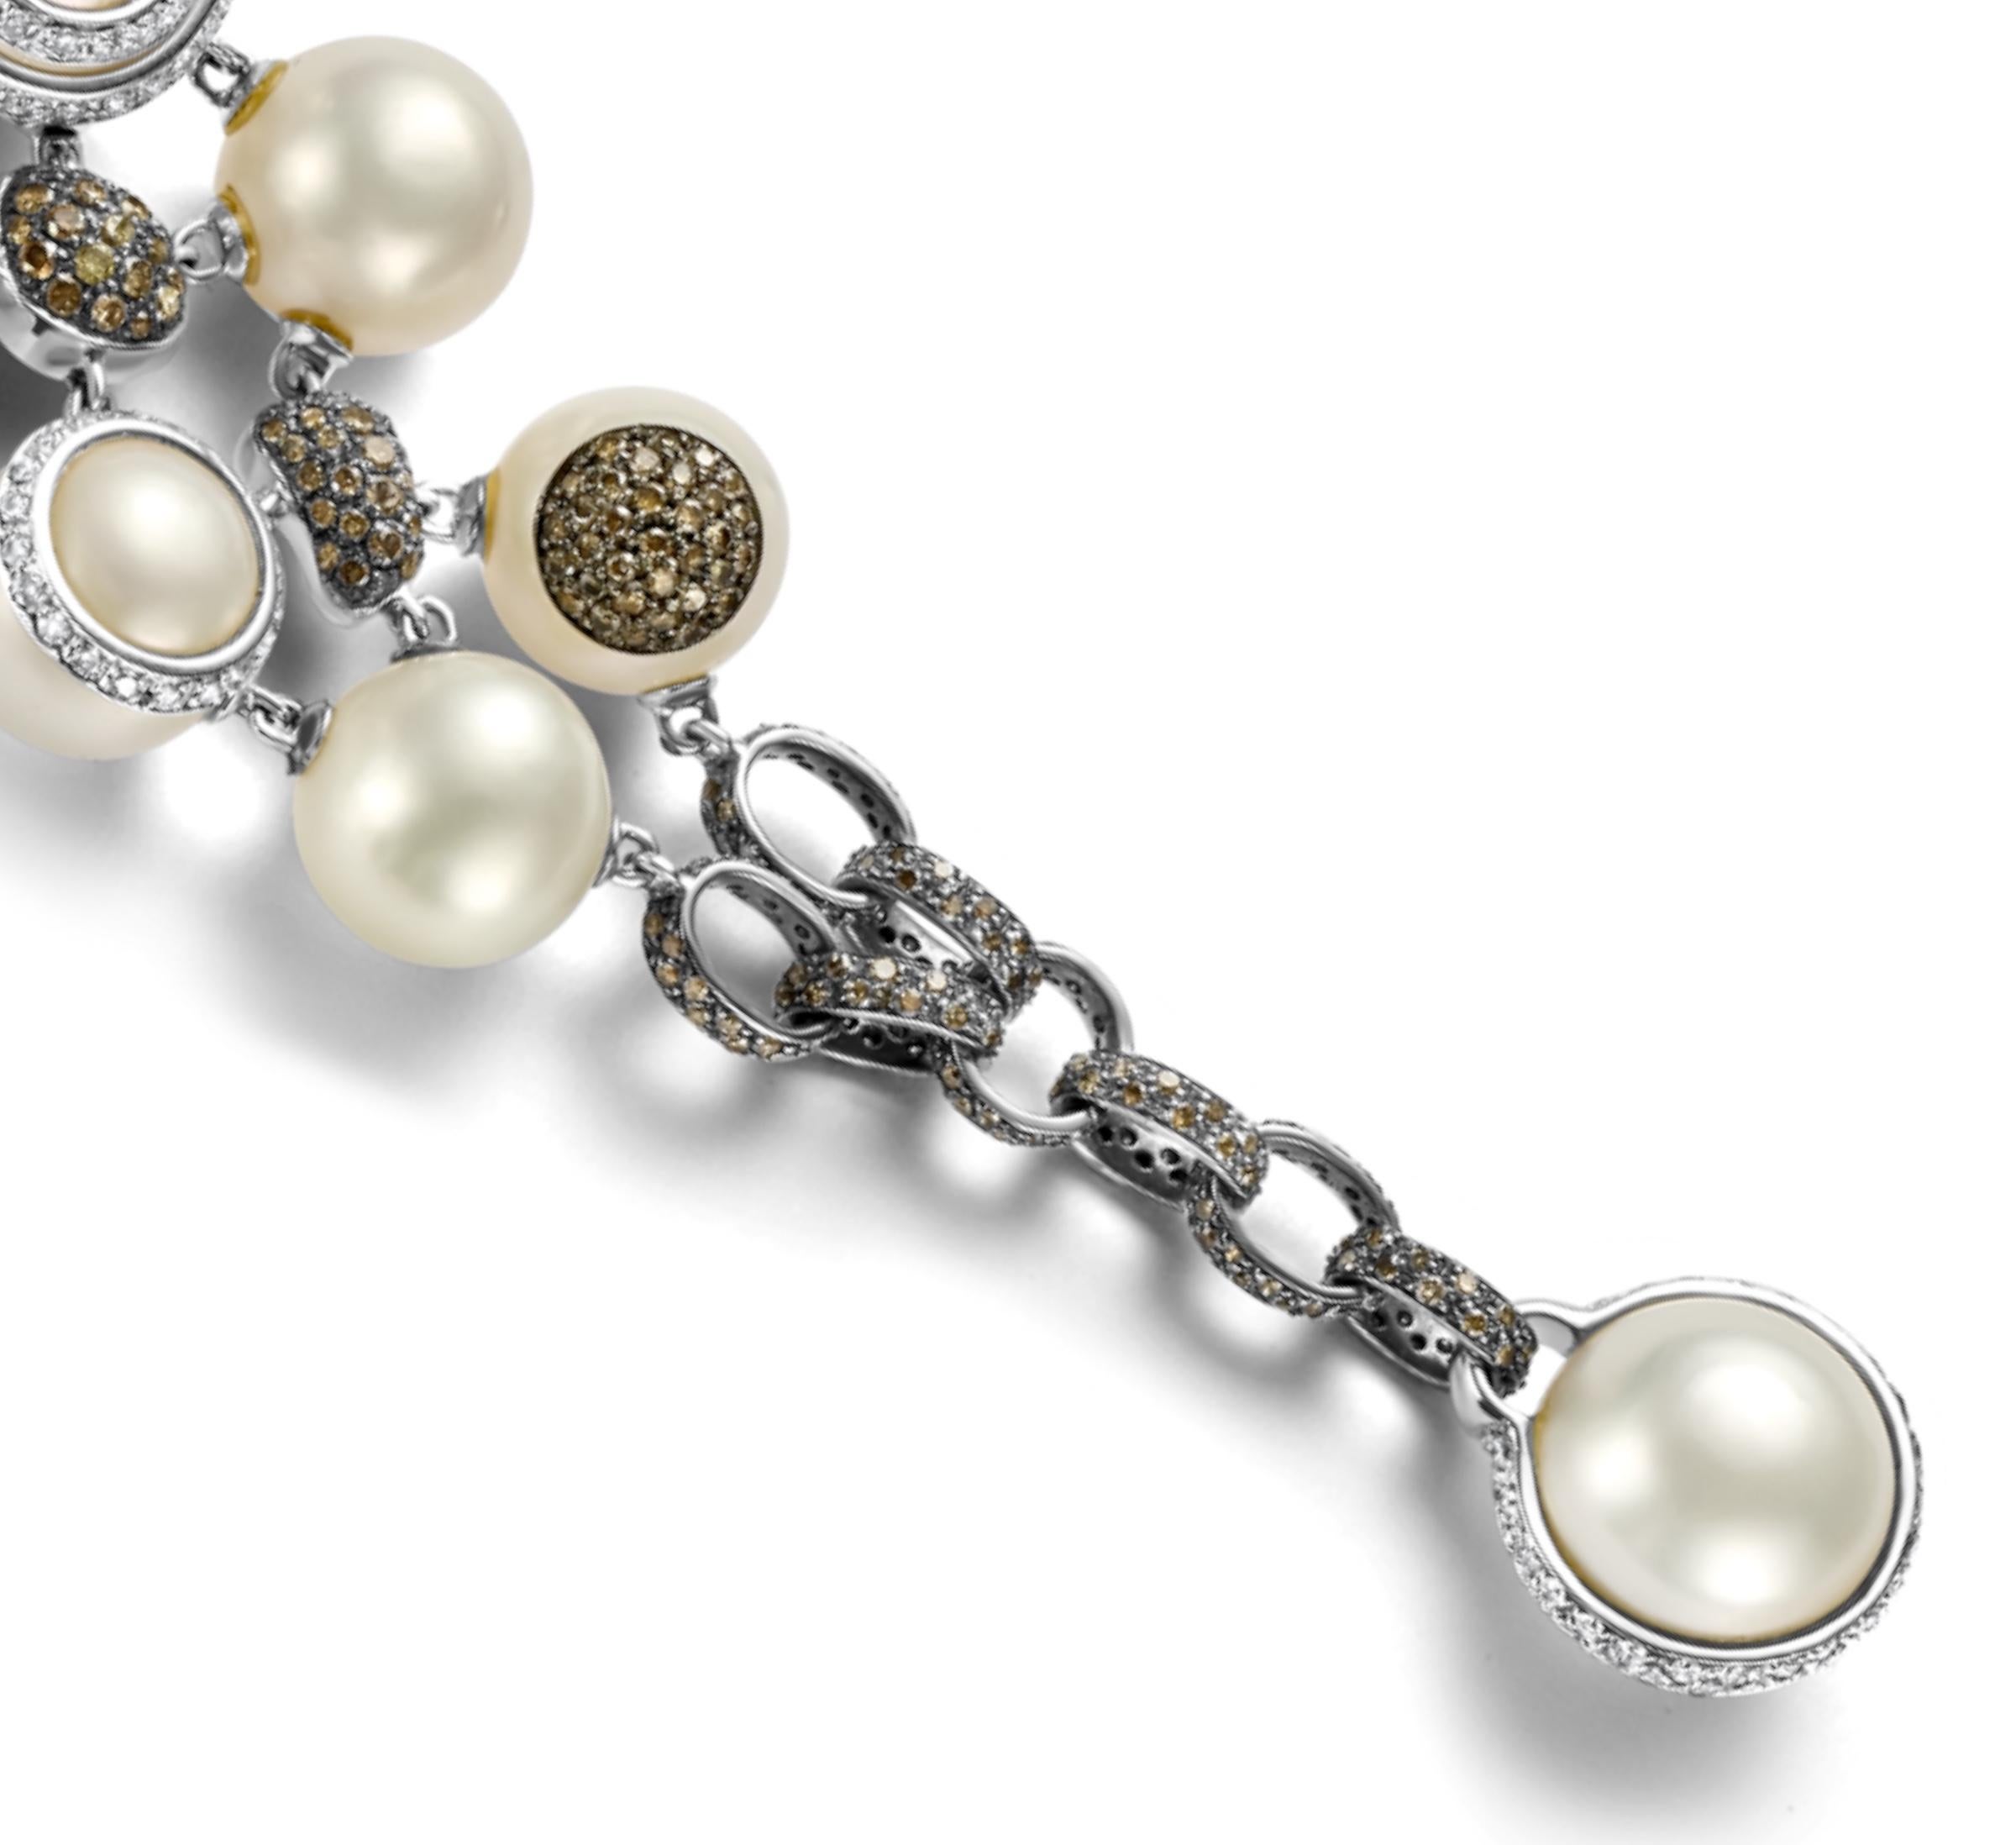 18kt White Gold Bracelet 12.6ct White & Cognac Diamonds Pearl Has Matching Ring For Sale 7